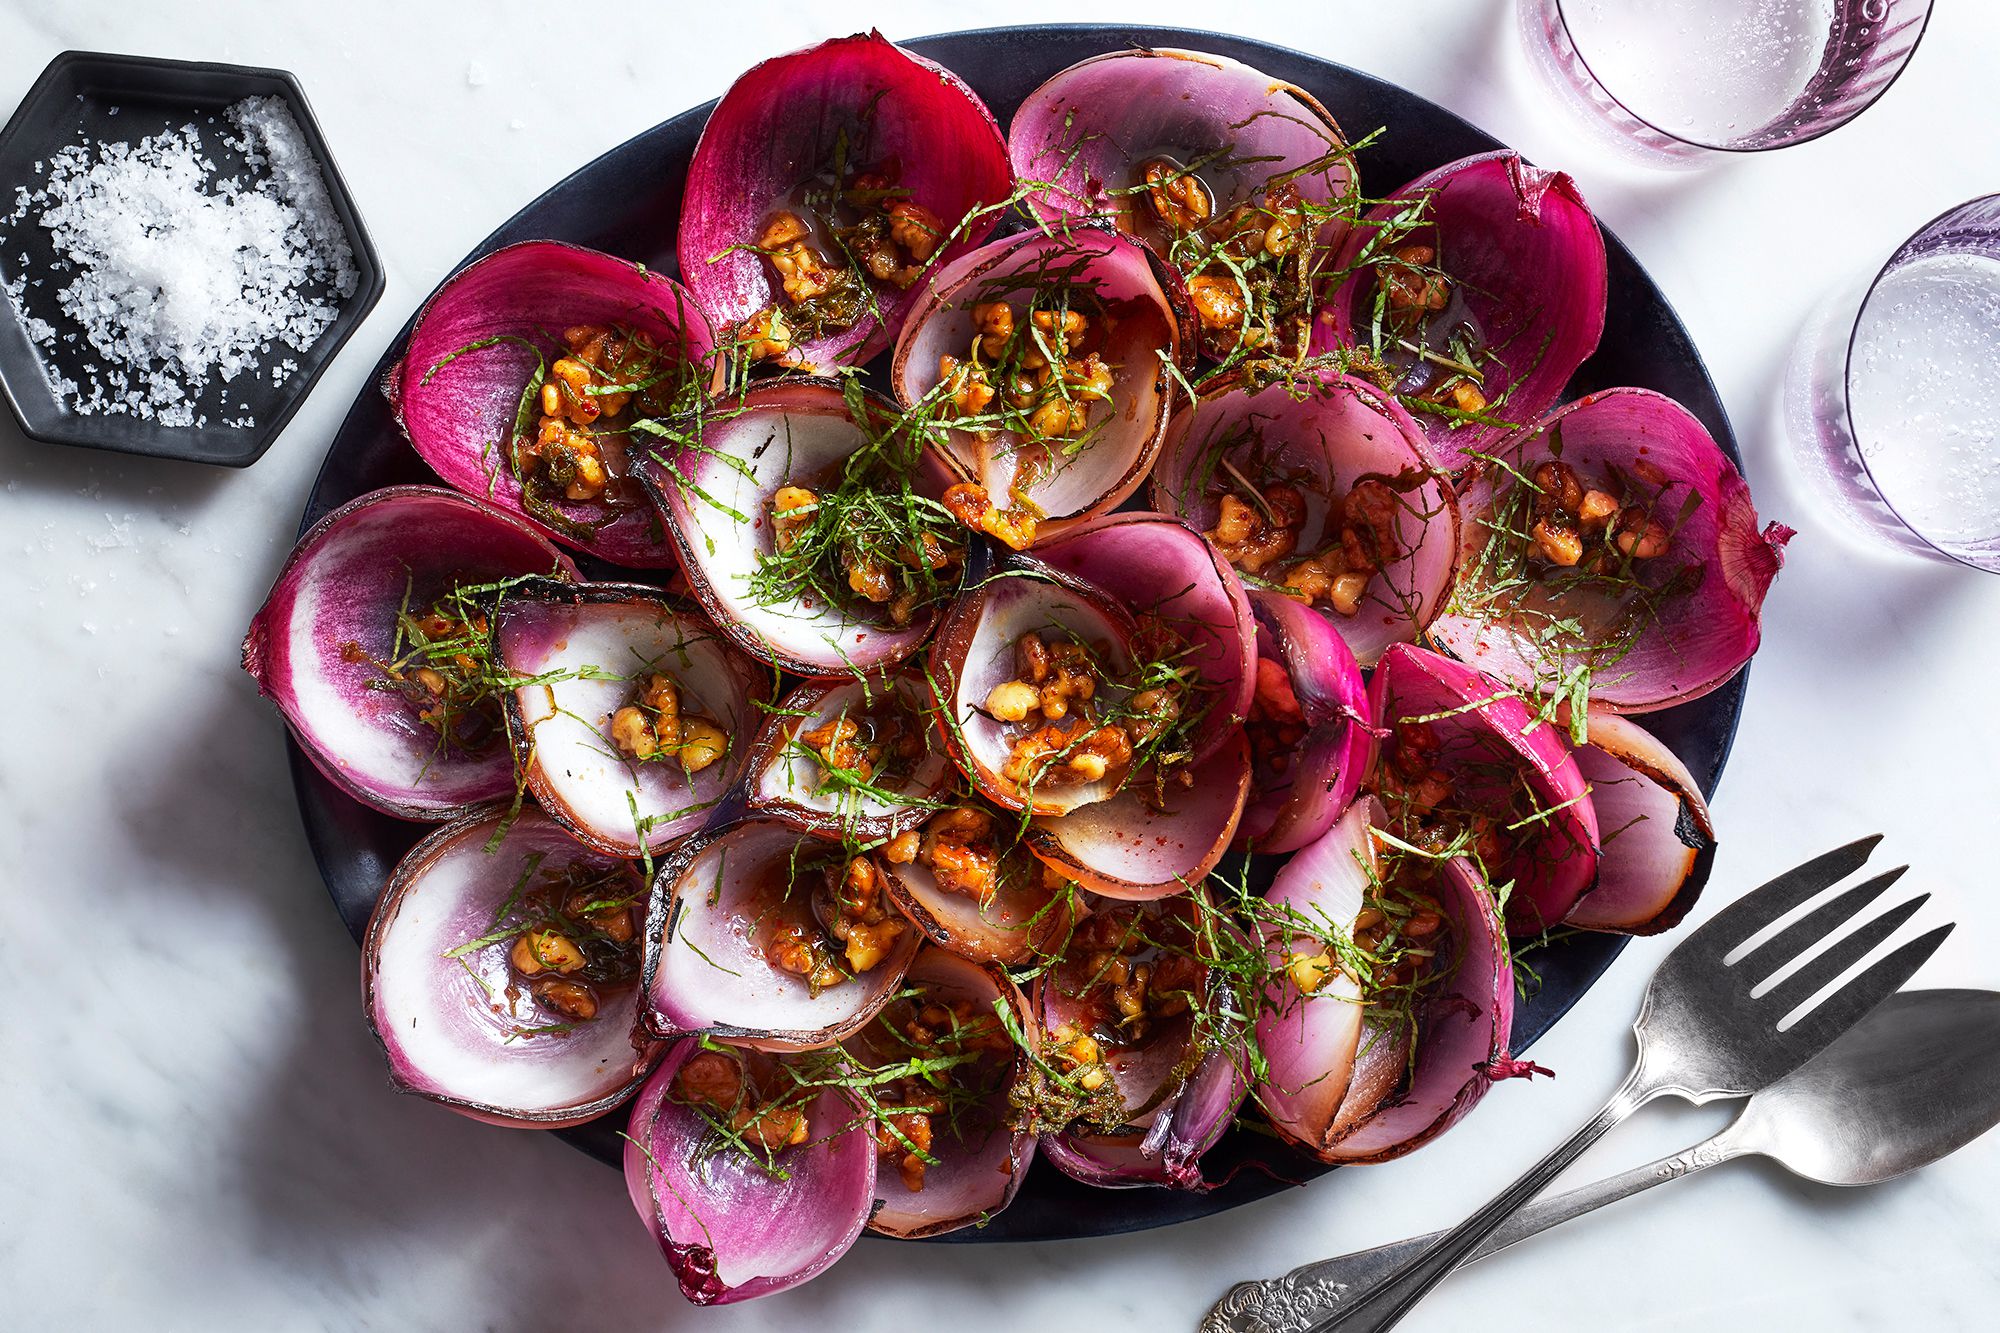 Is This the Prettiest Salad You've Ever Seen?